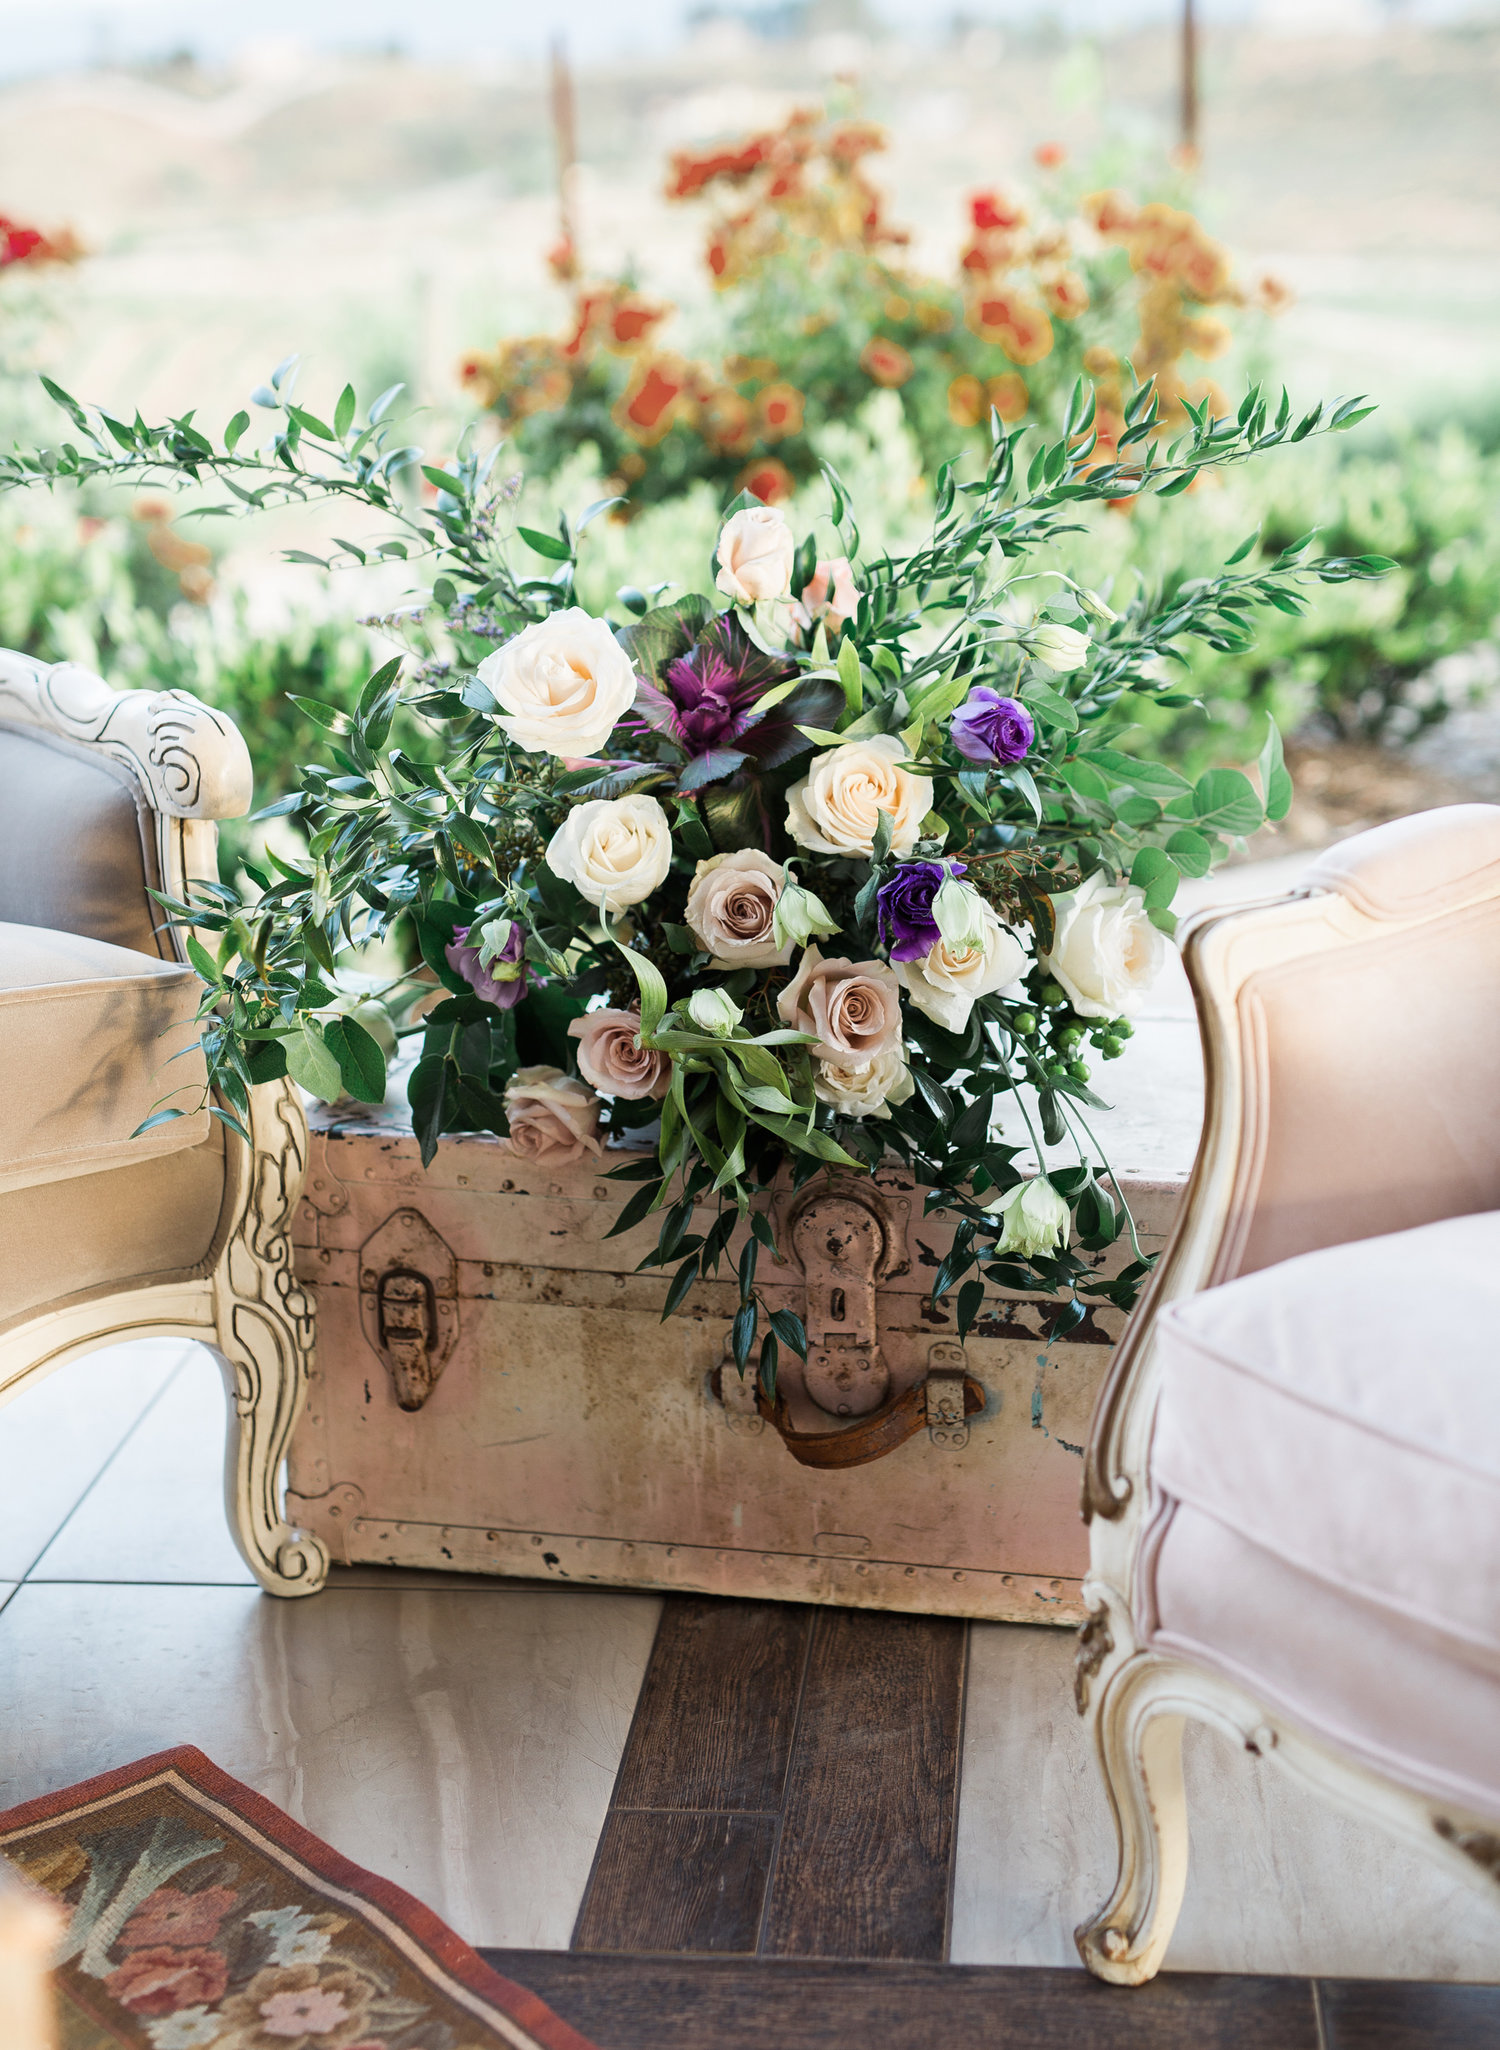 LV Floral Events - Flowers - Los Angeles, CA - WeddingWire